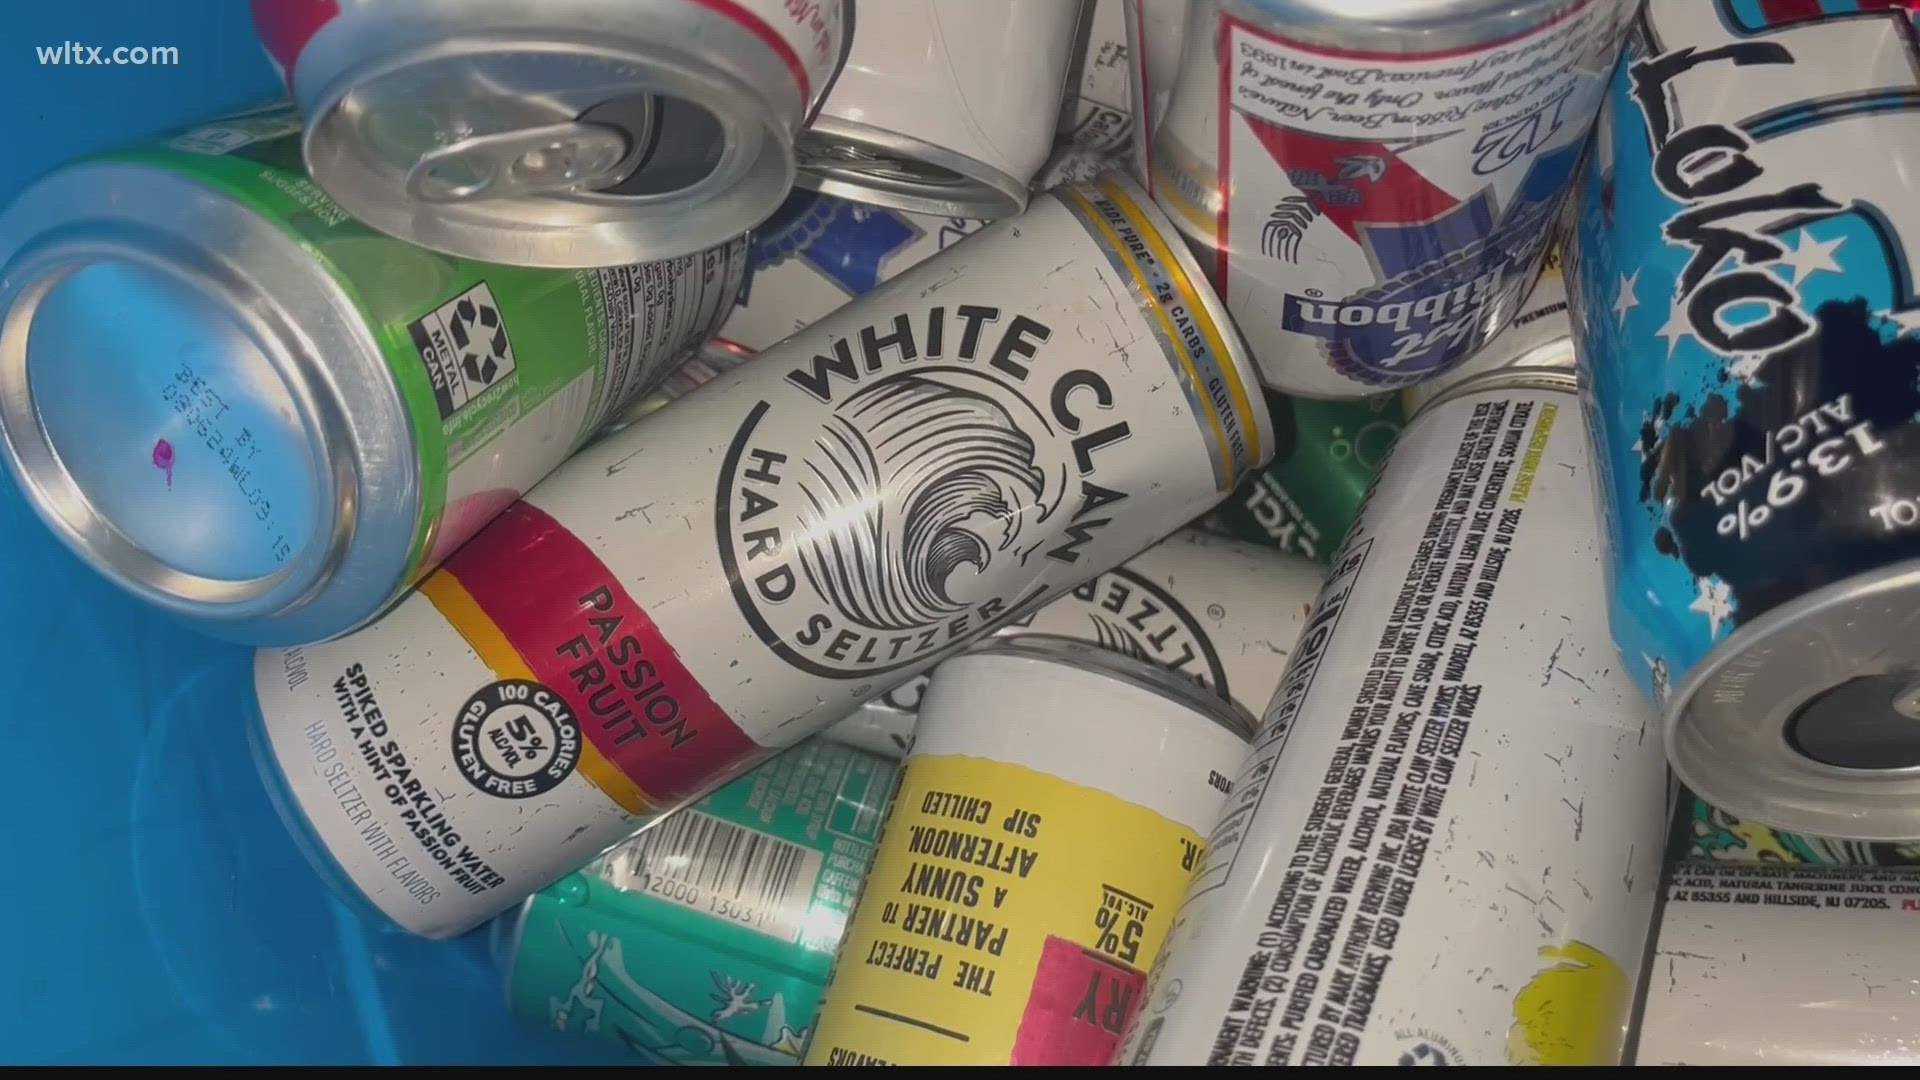 Residents in Cayce are upset about alcohol at "family friendly" events.